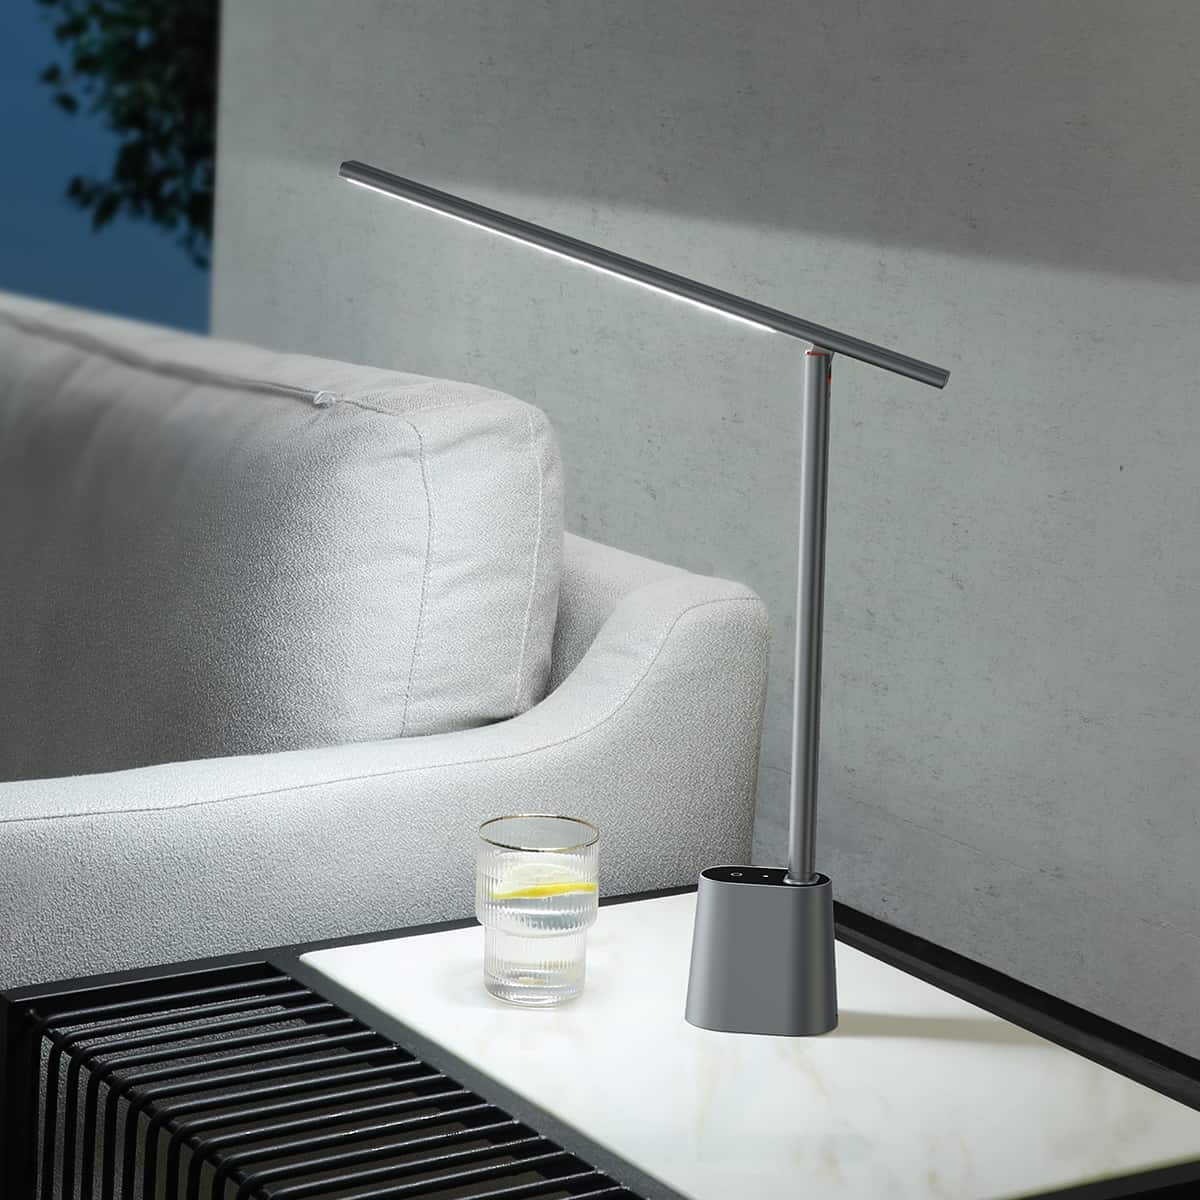 10 Reasons Why Amber LED Reading Lamp Has the Edge Over Others